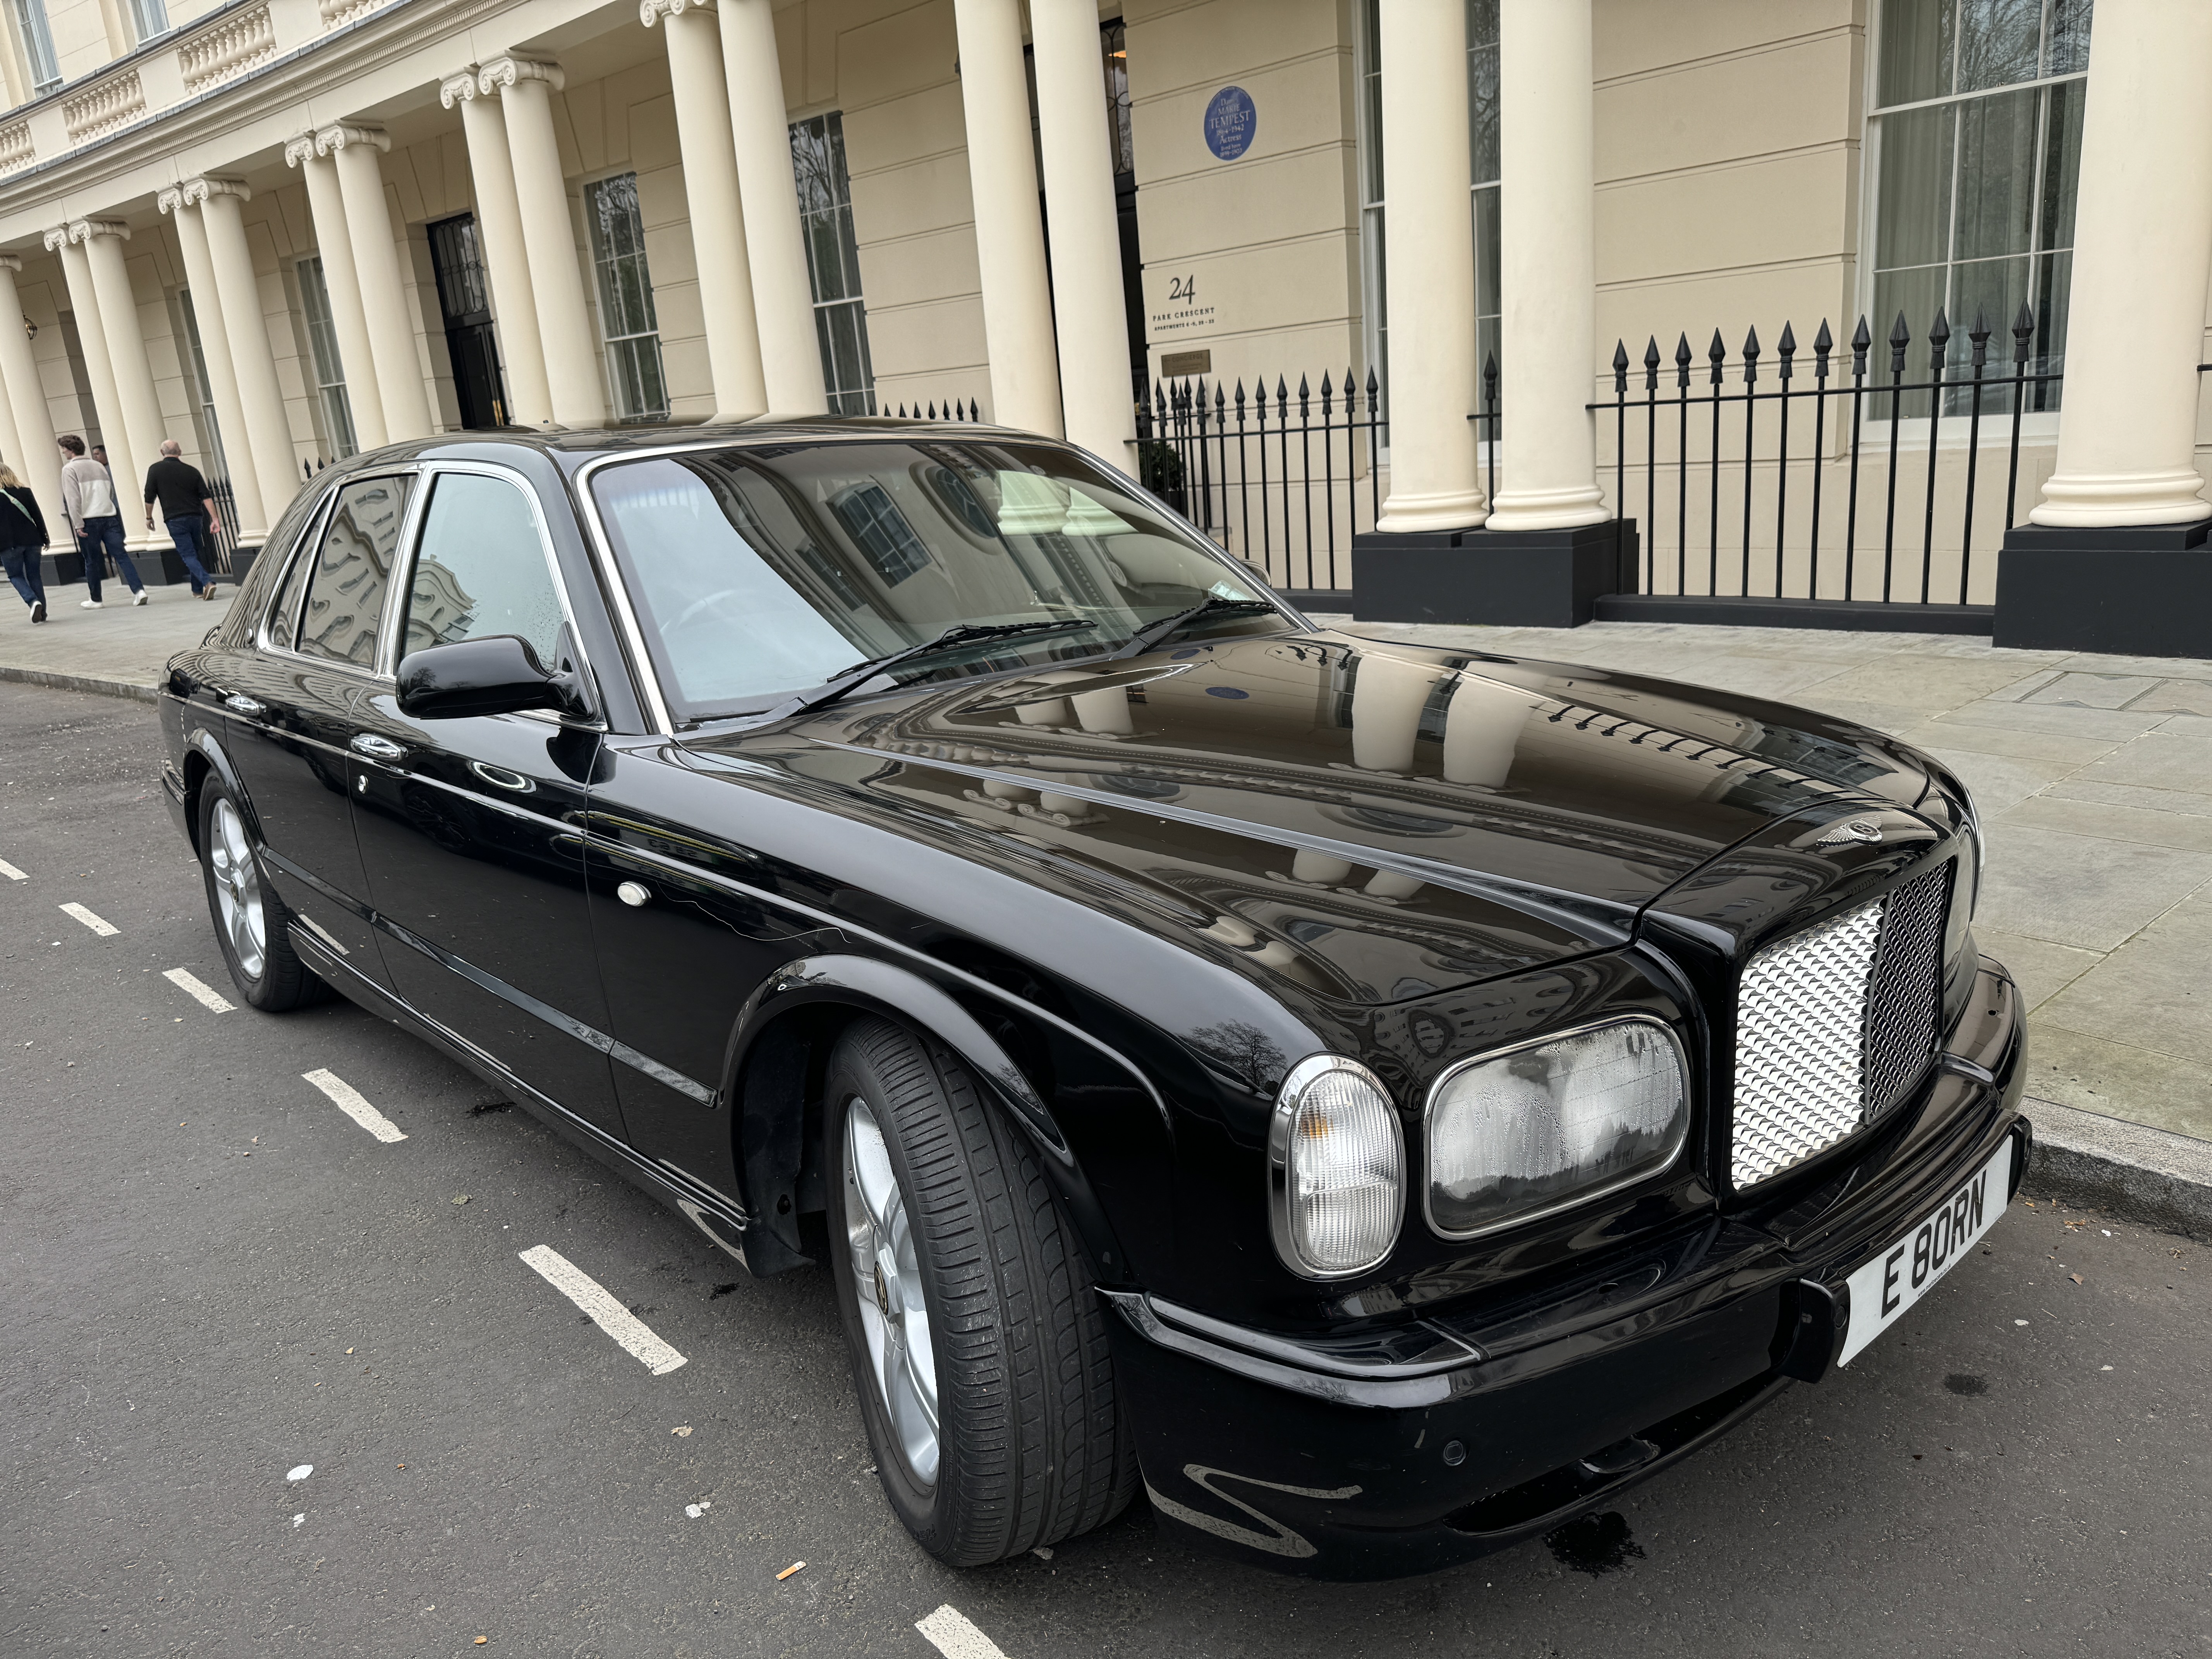 Bentley Arnage R, 6750cc V8 Twin Turbo, Black coachwork with matching black leather upholstery and - Image 68 of 78